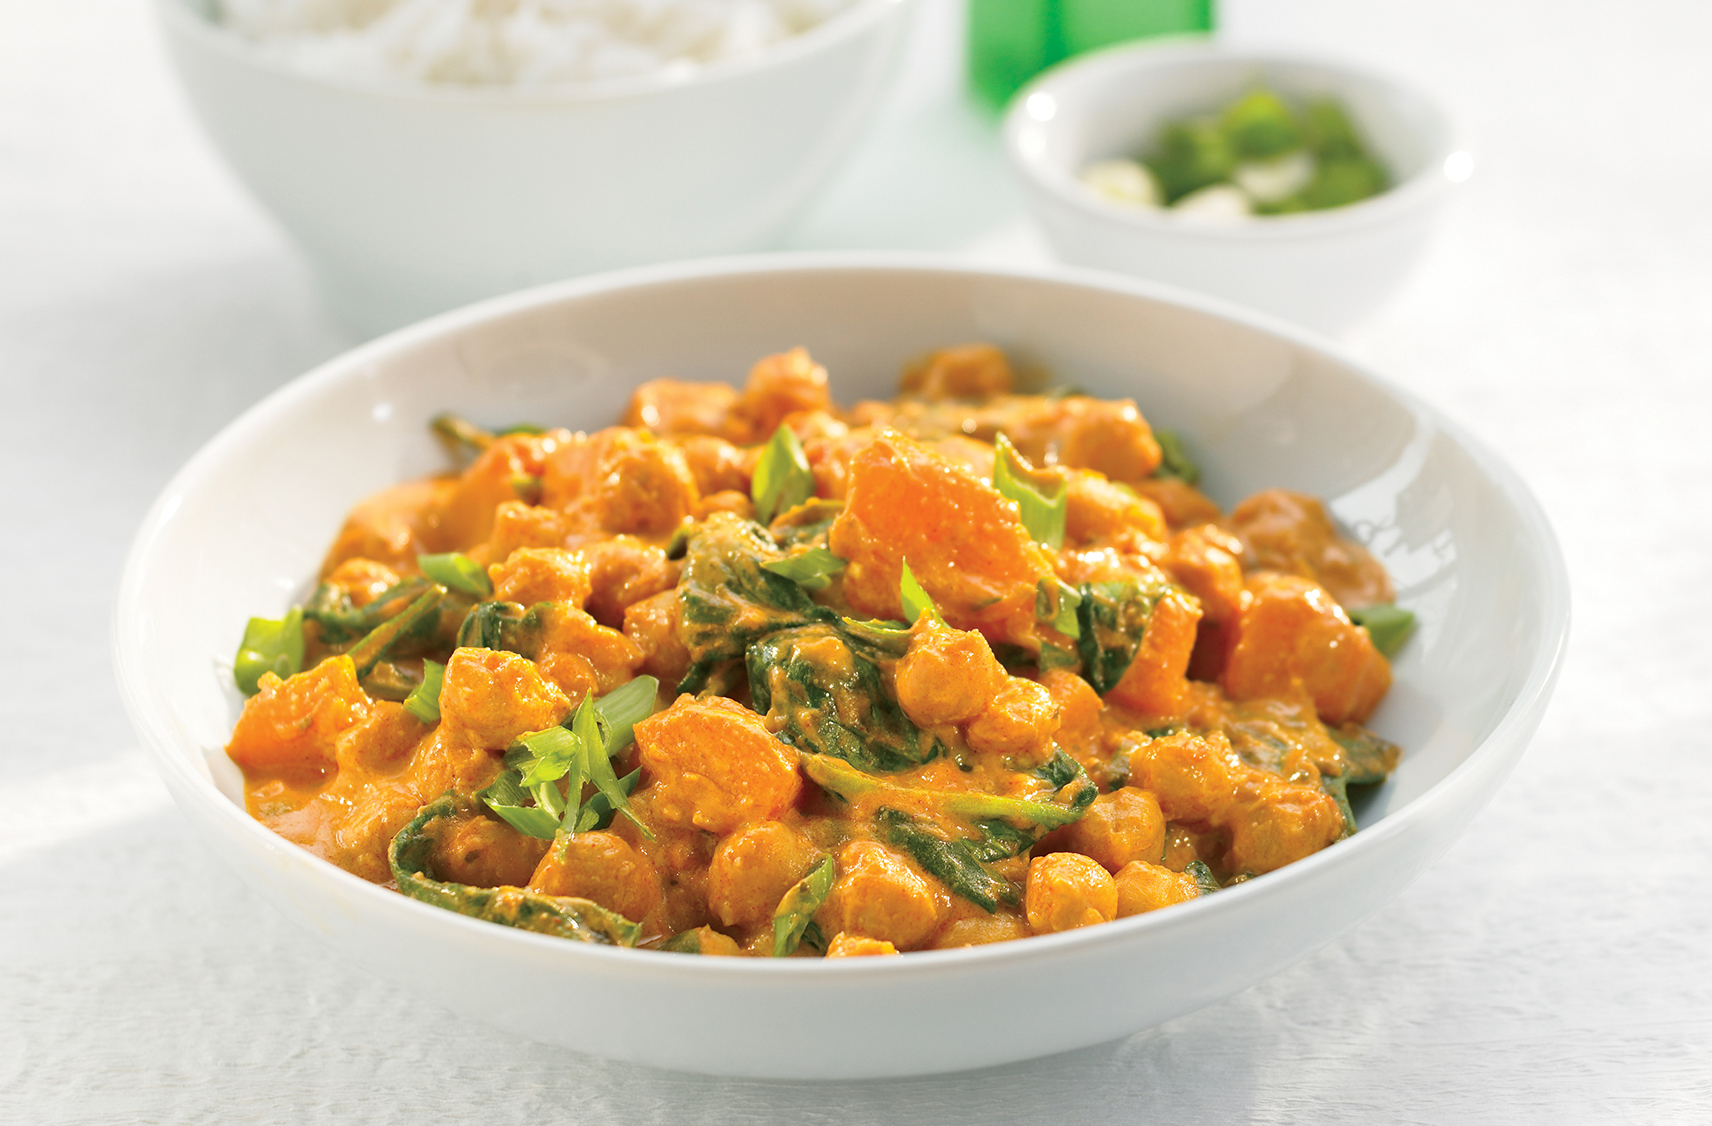 A bowl of curried chick peas & squash korma with spinach & green onions